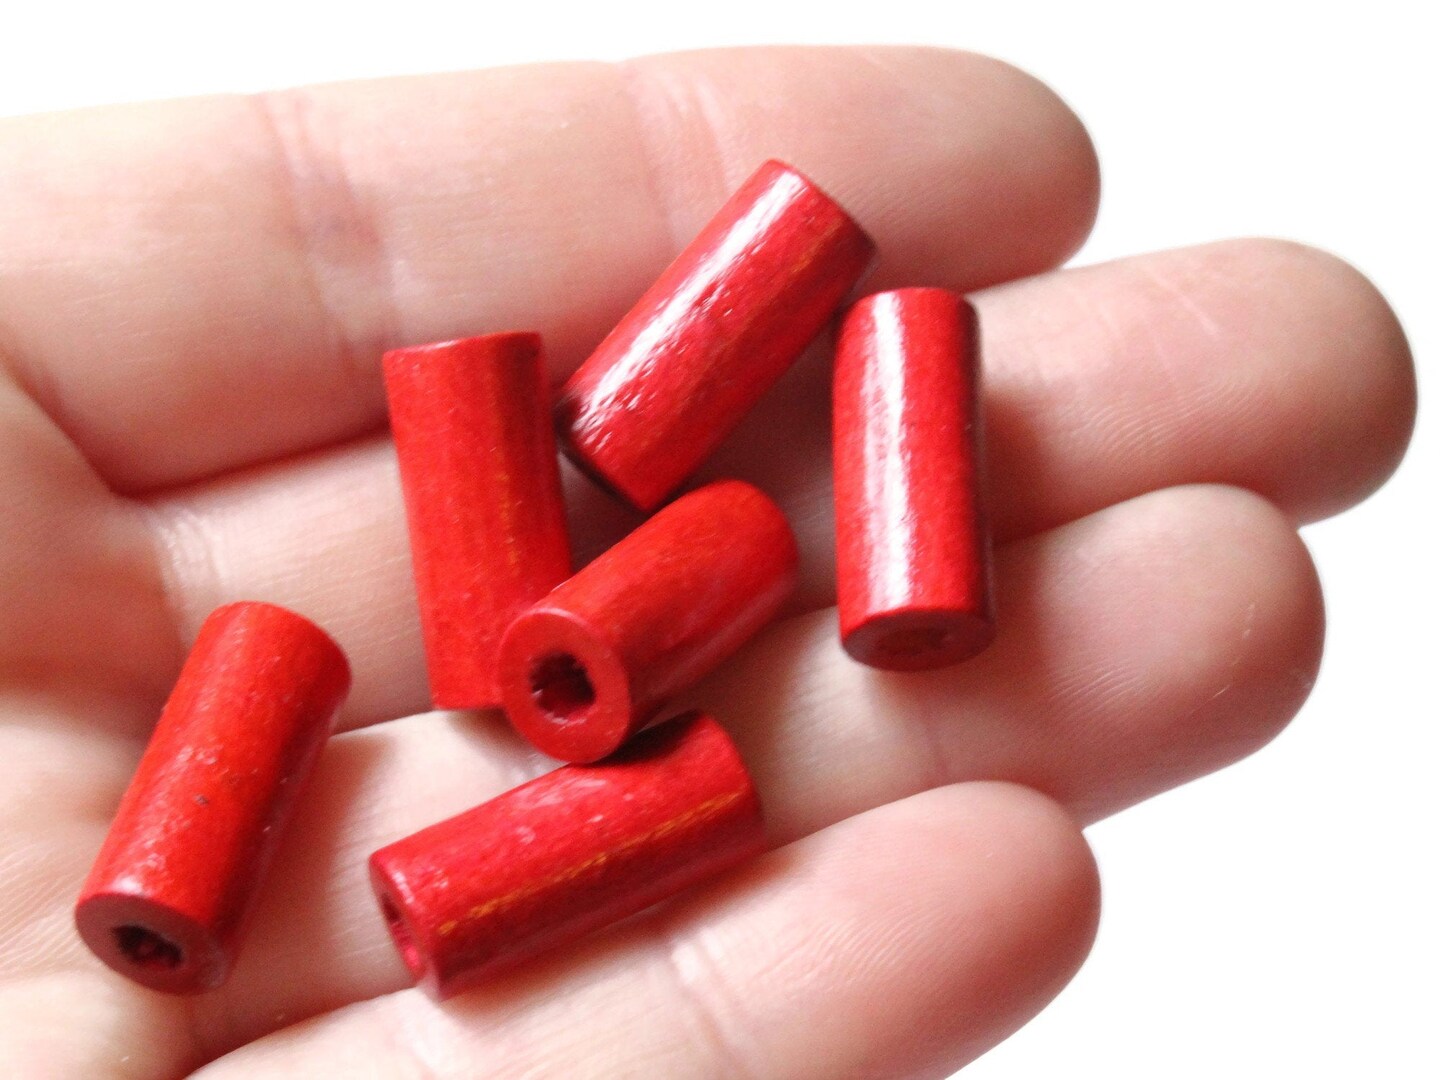 24 18mm Red Vintage Wood Tube Beads Wooden Beads